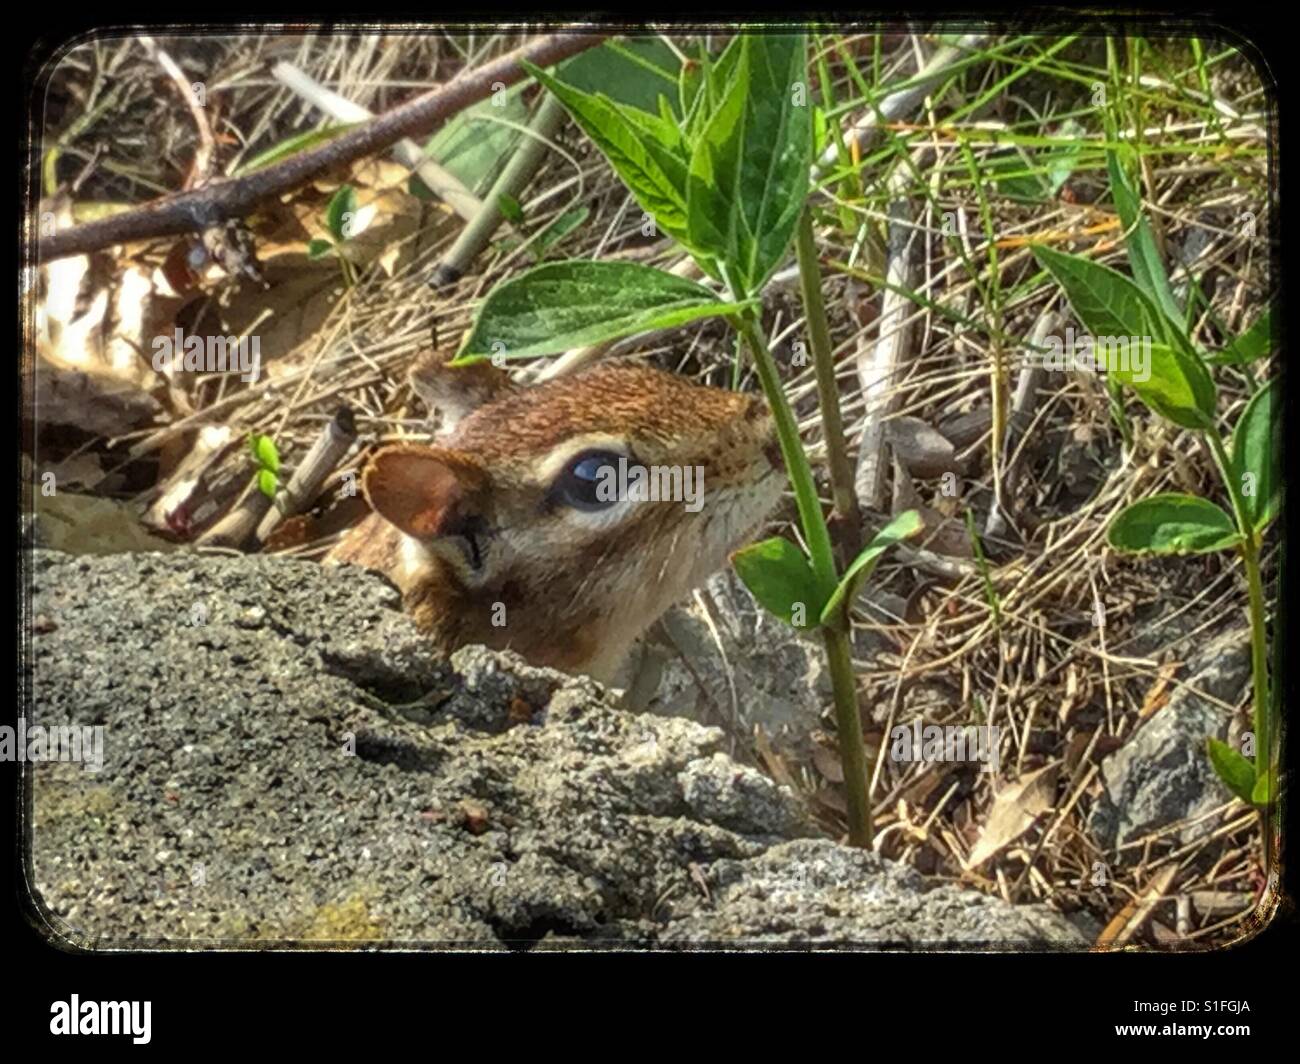 Chipmunk smelling the plant. Stock Photo